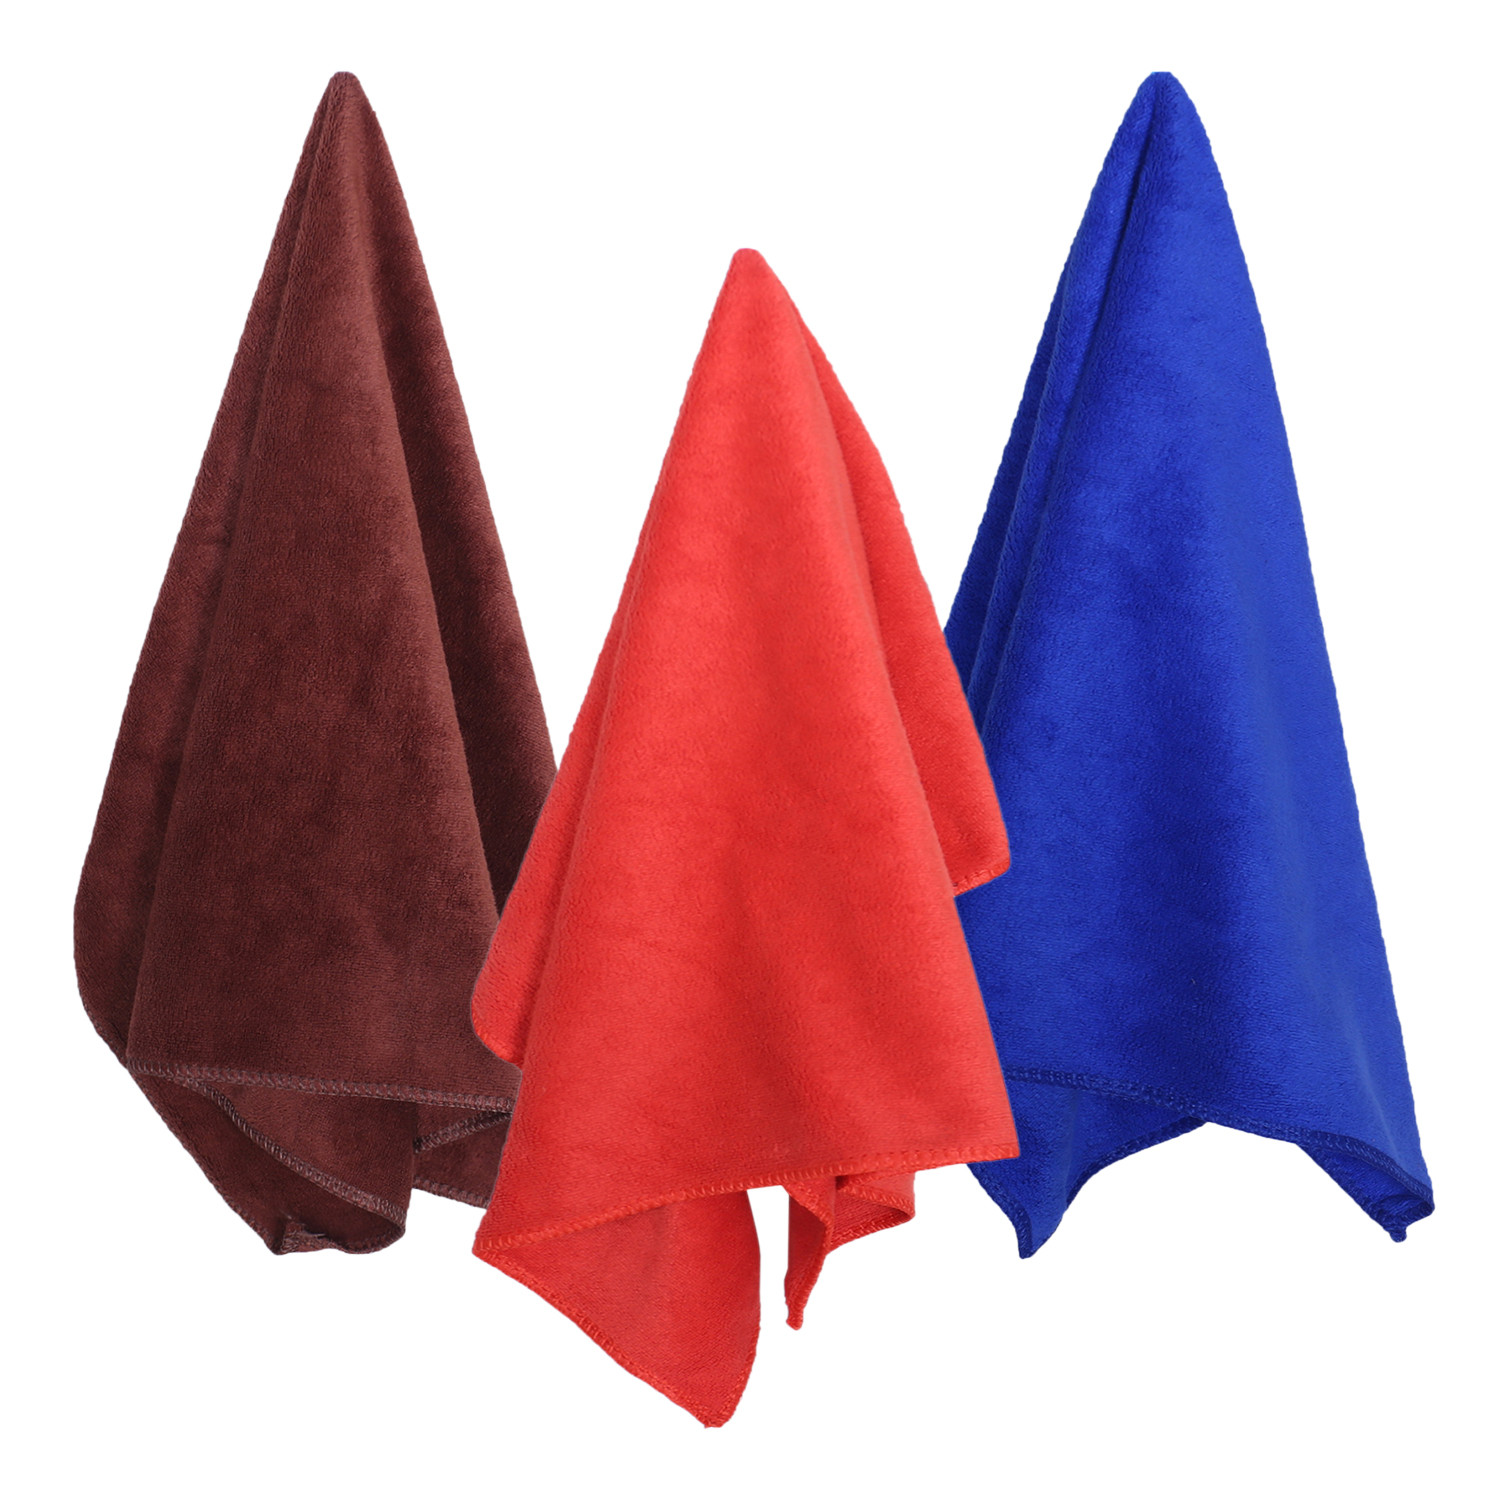 Kuber Industries Cleaning Cloths|Microfiber Highly Absorbent Wash Towels for Kitchen,Car,Window,24 x 16 Inch,Pack of 3 (Red,Brown & Blue)